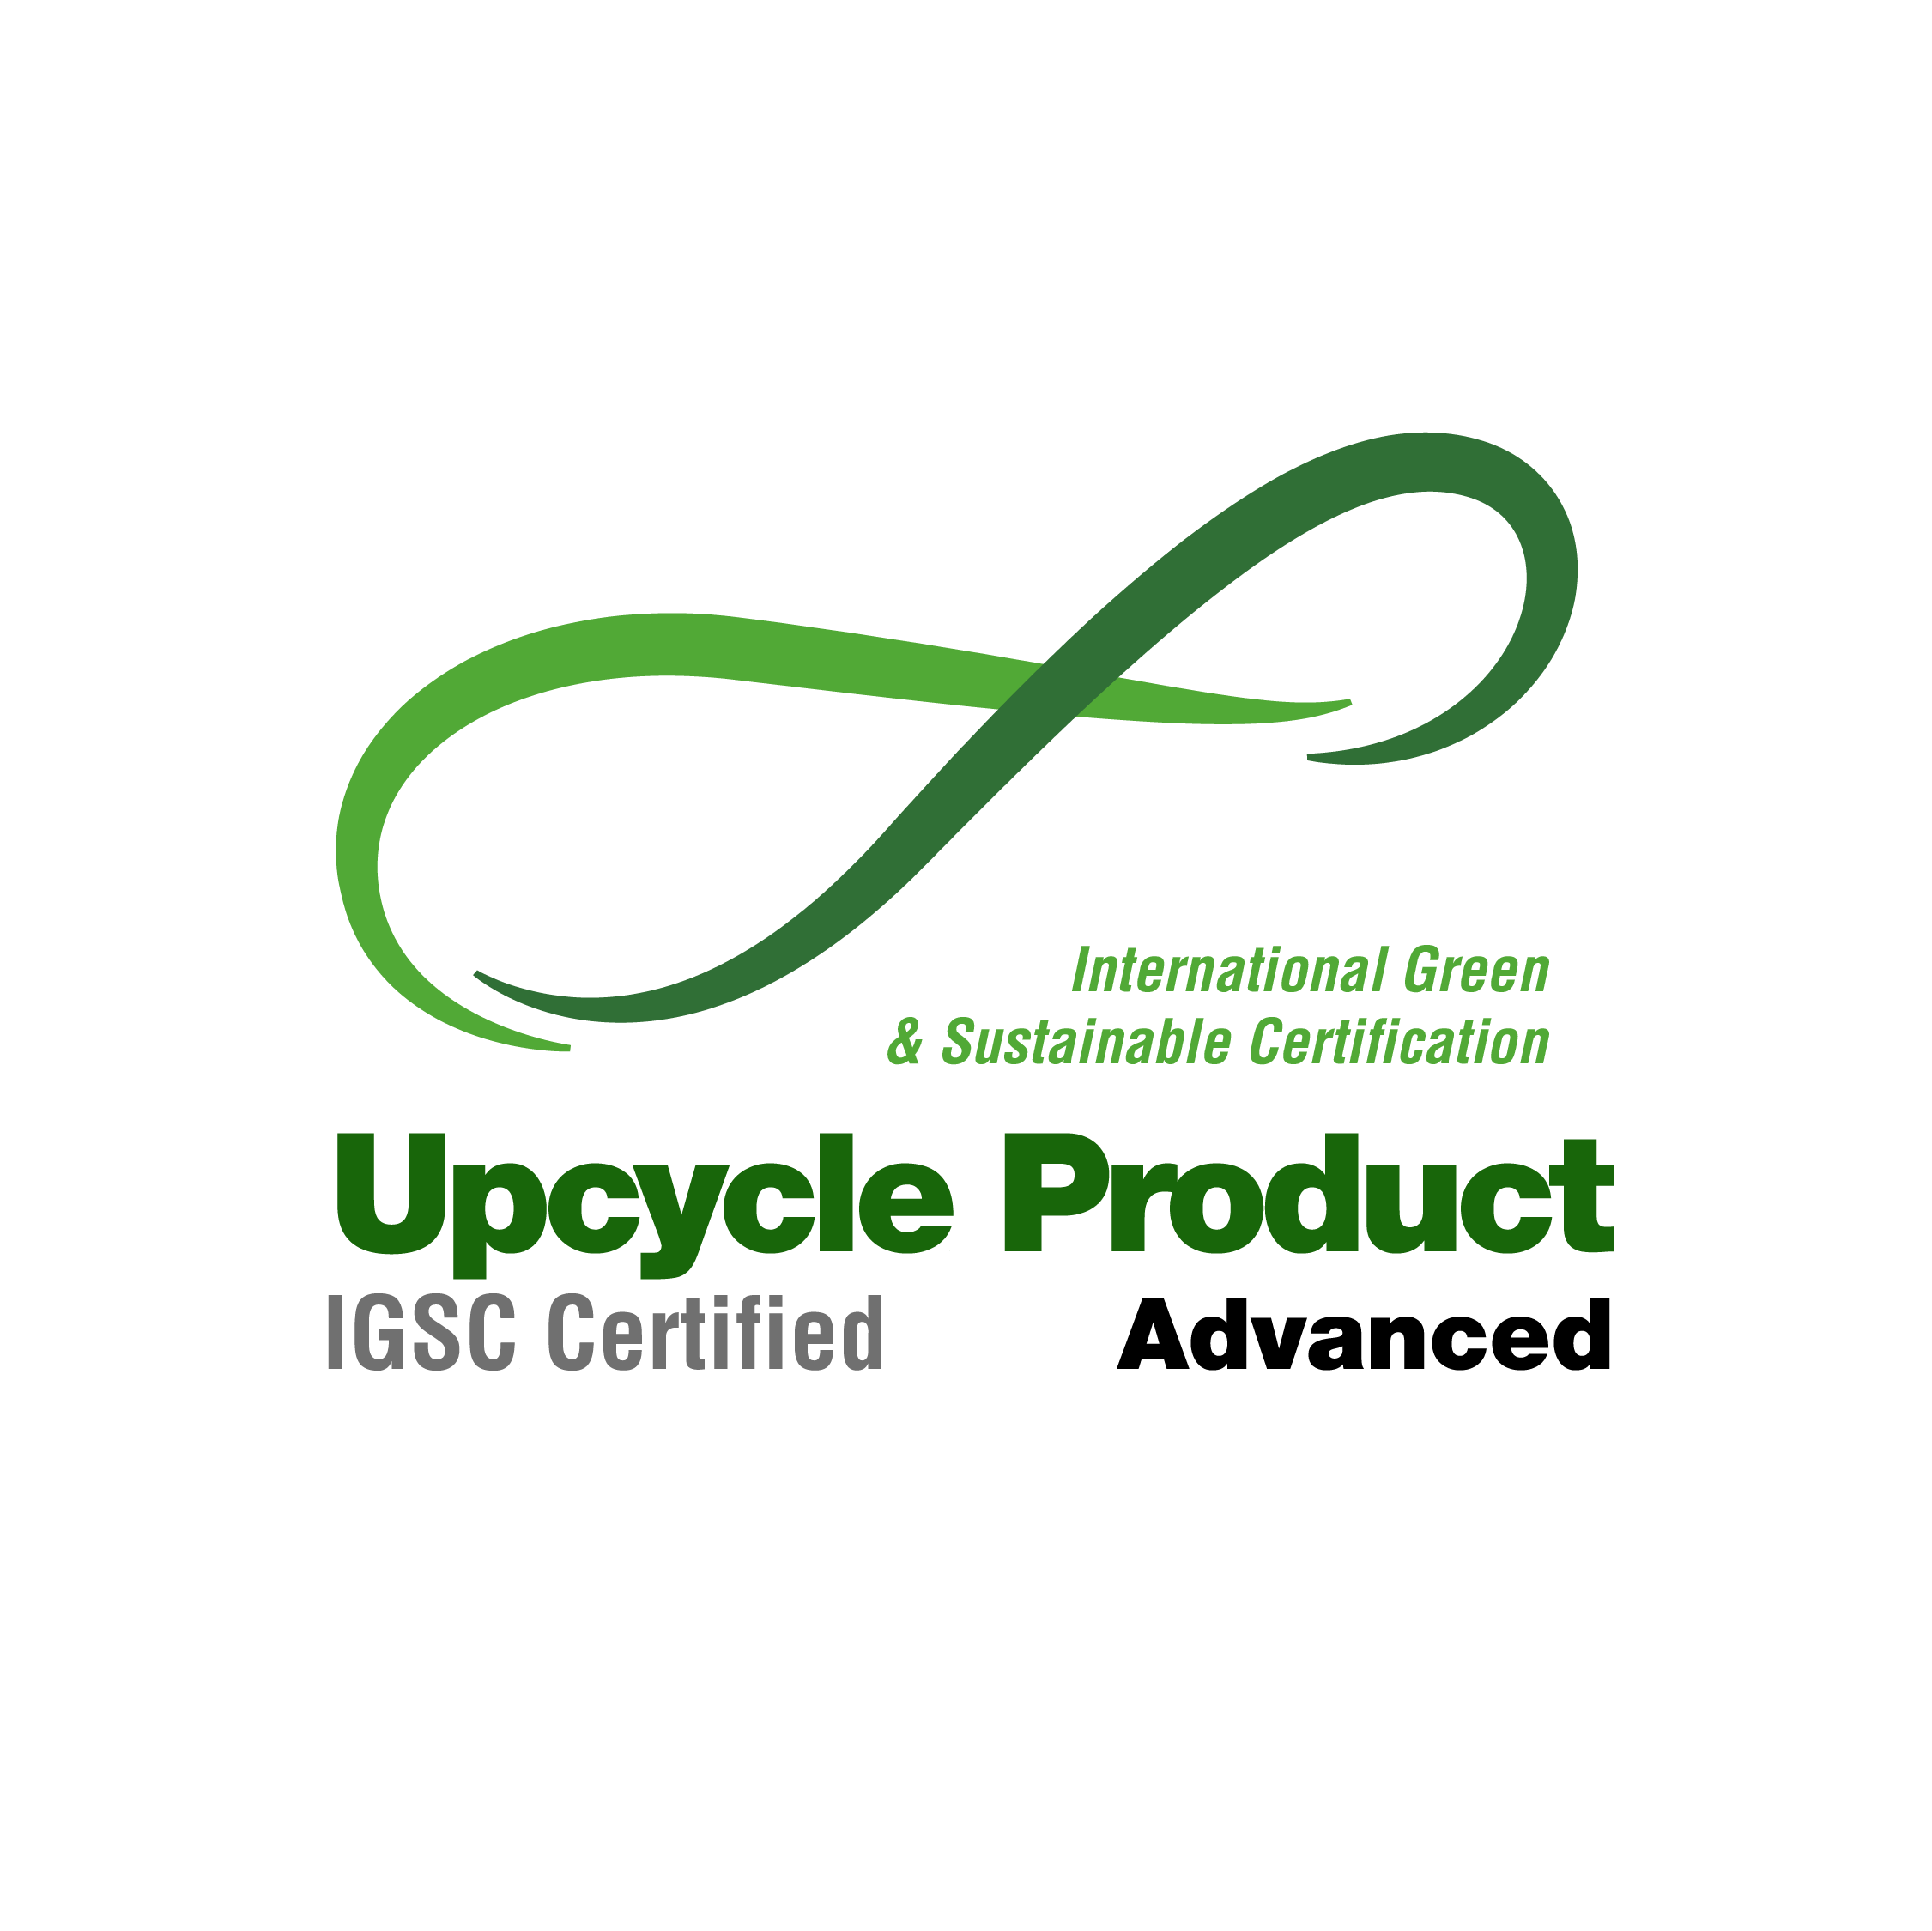 Institute of Global Sustainability Certification (IGSC) Introduces Upcycle Product Certification for The First Time